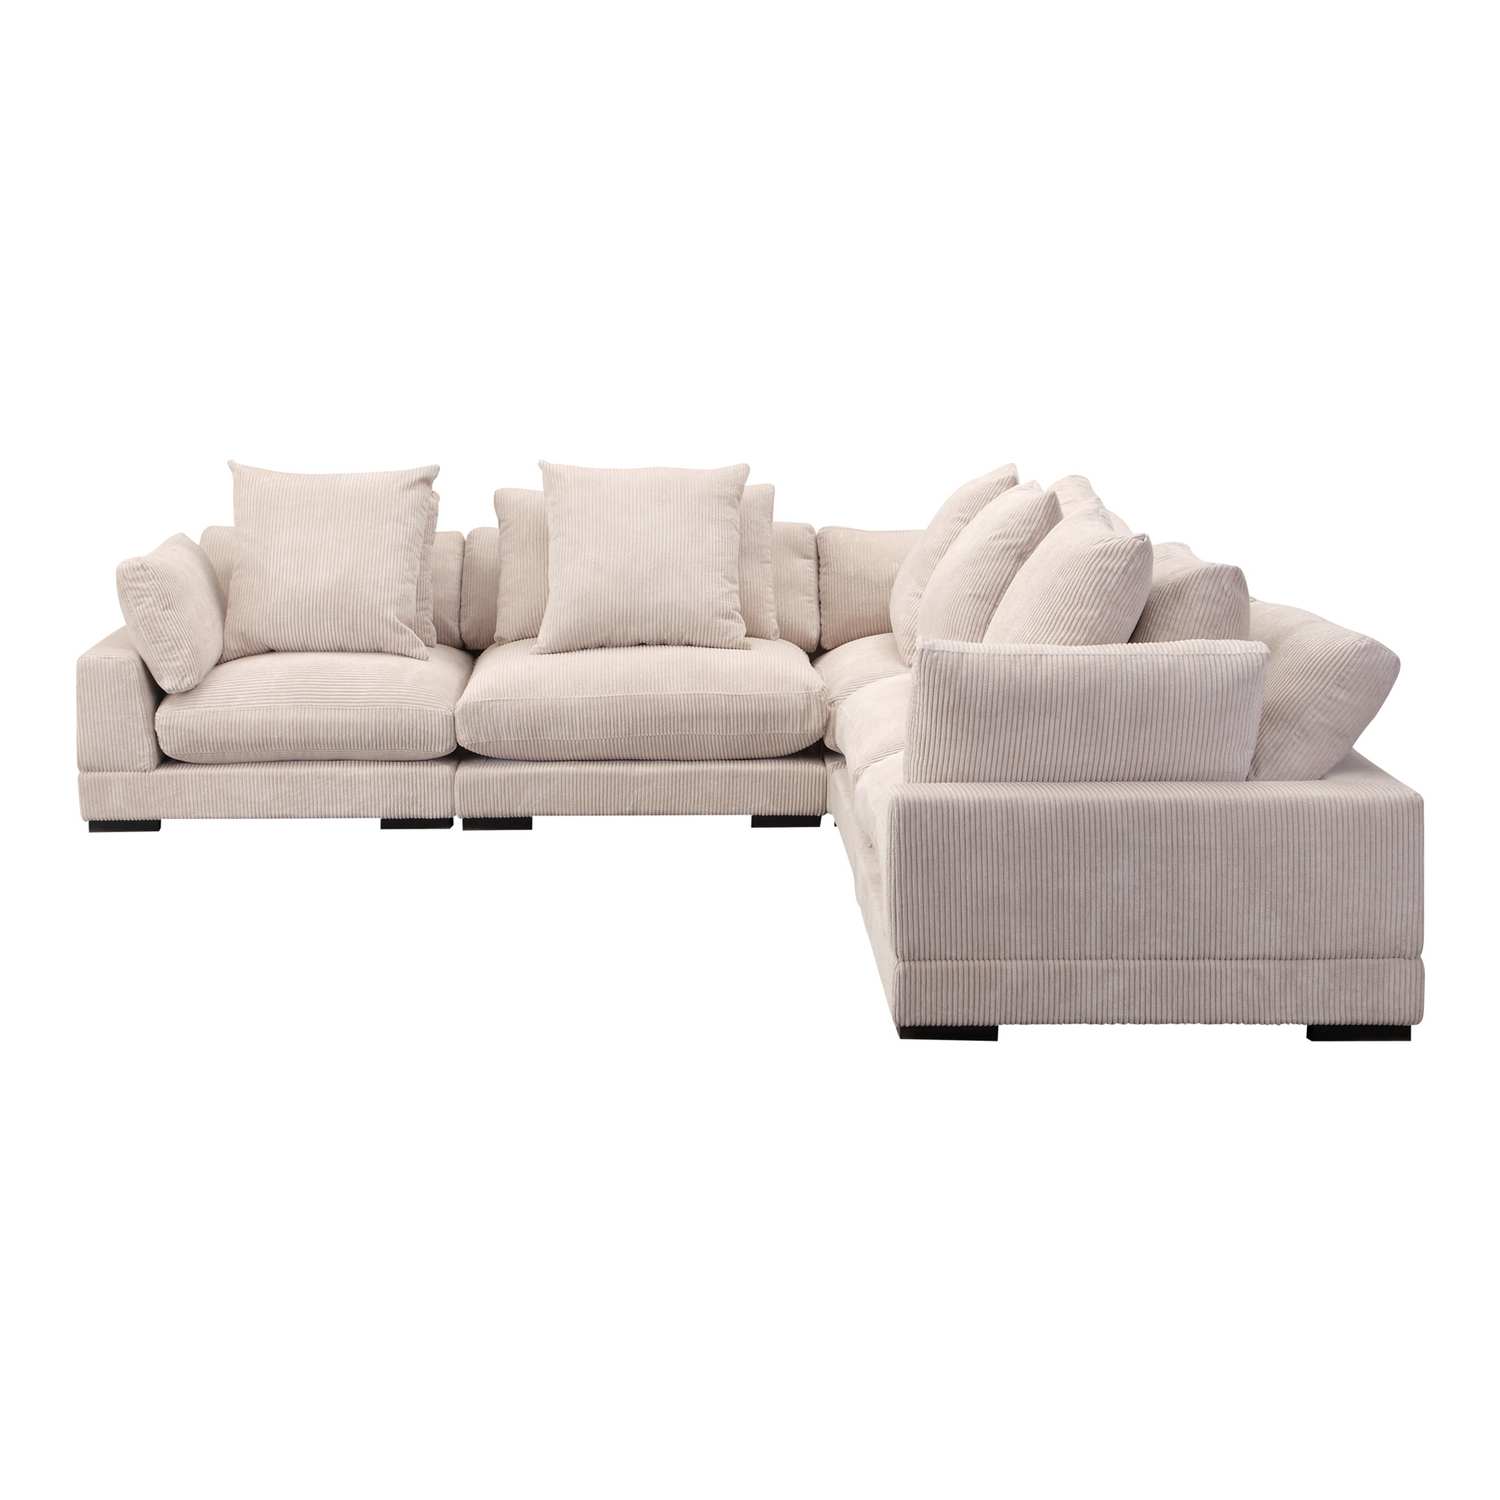 Sofas & Sectionals Category